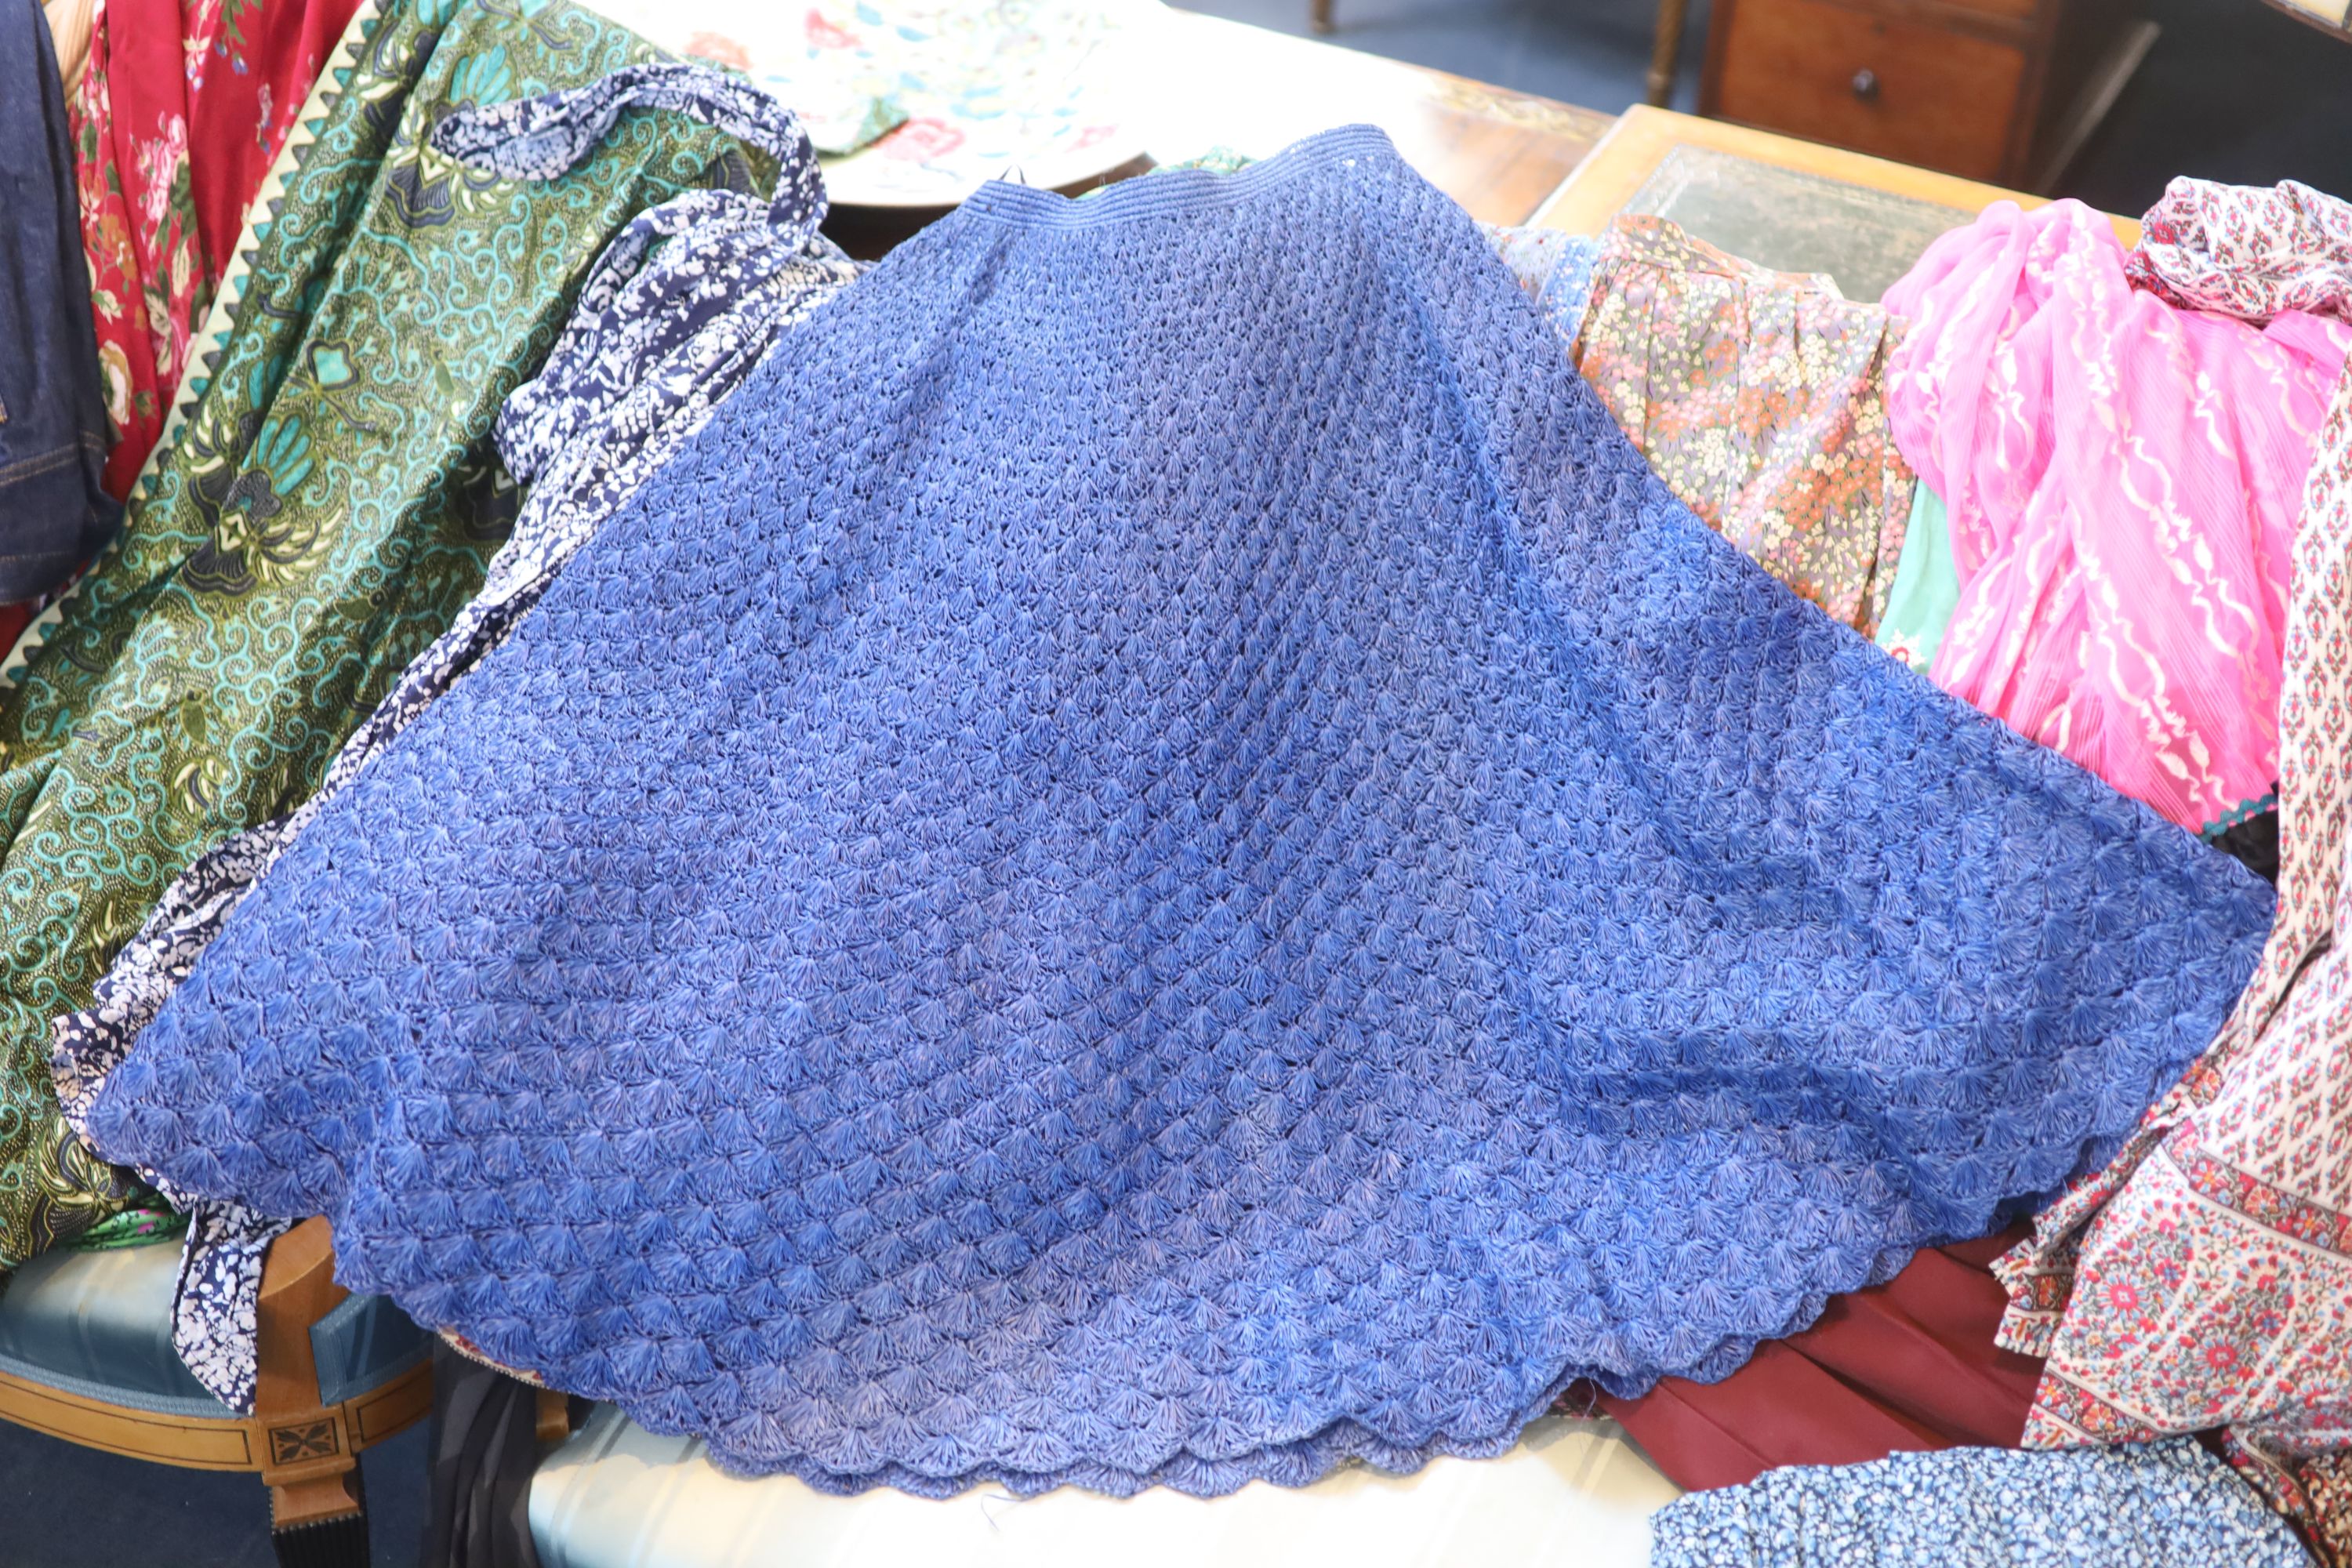 A large collection of fabric skirts including a raffier skirt in blue